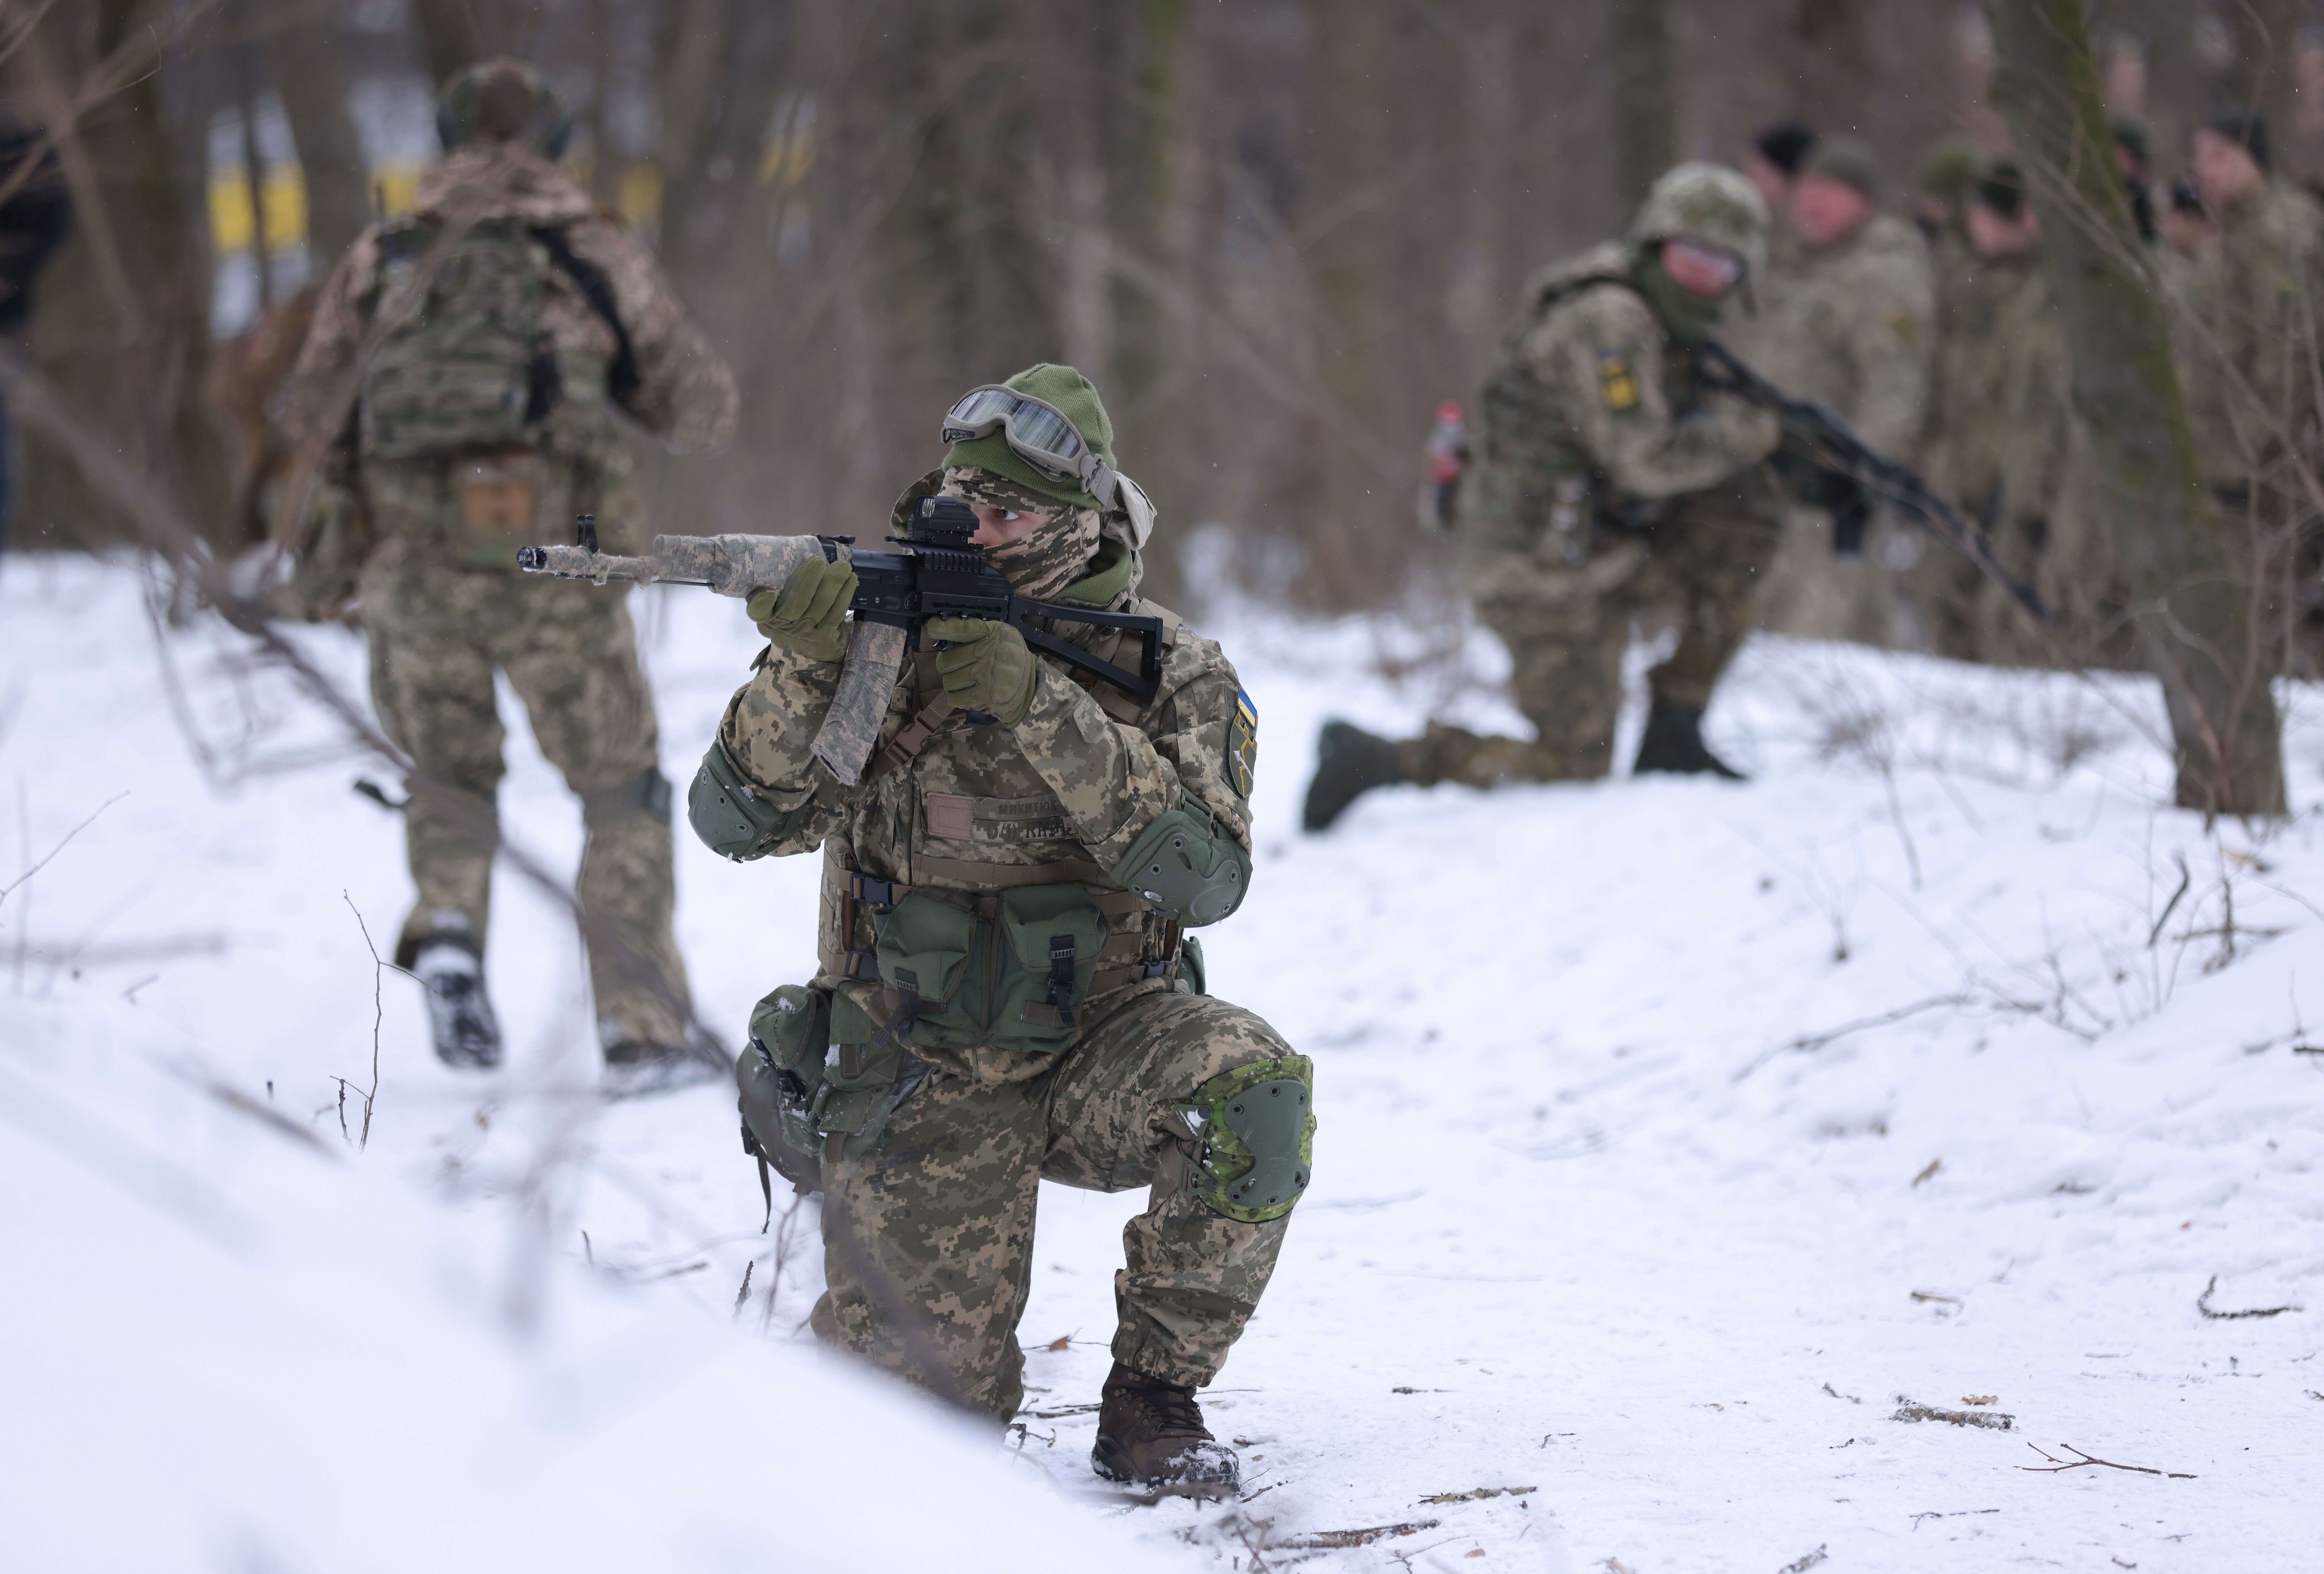 Civilian participants in a Kyiv Territorial Defence unit train on a Saturday in a forest on January 22, 2022 in Kyiv, Ukraine. 